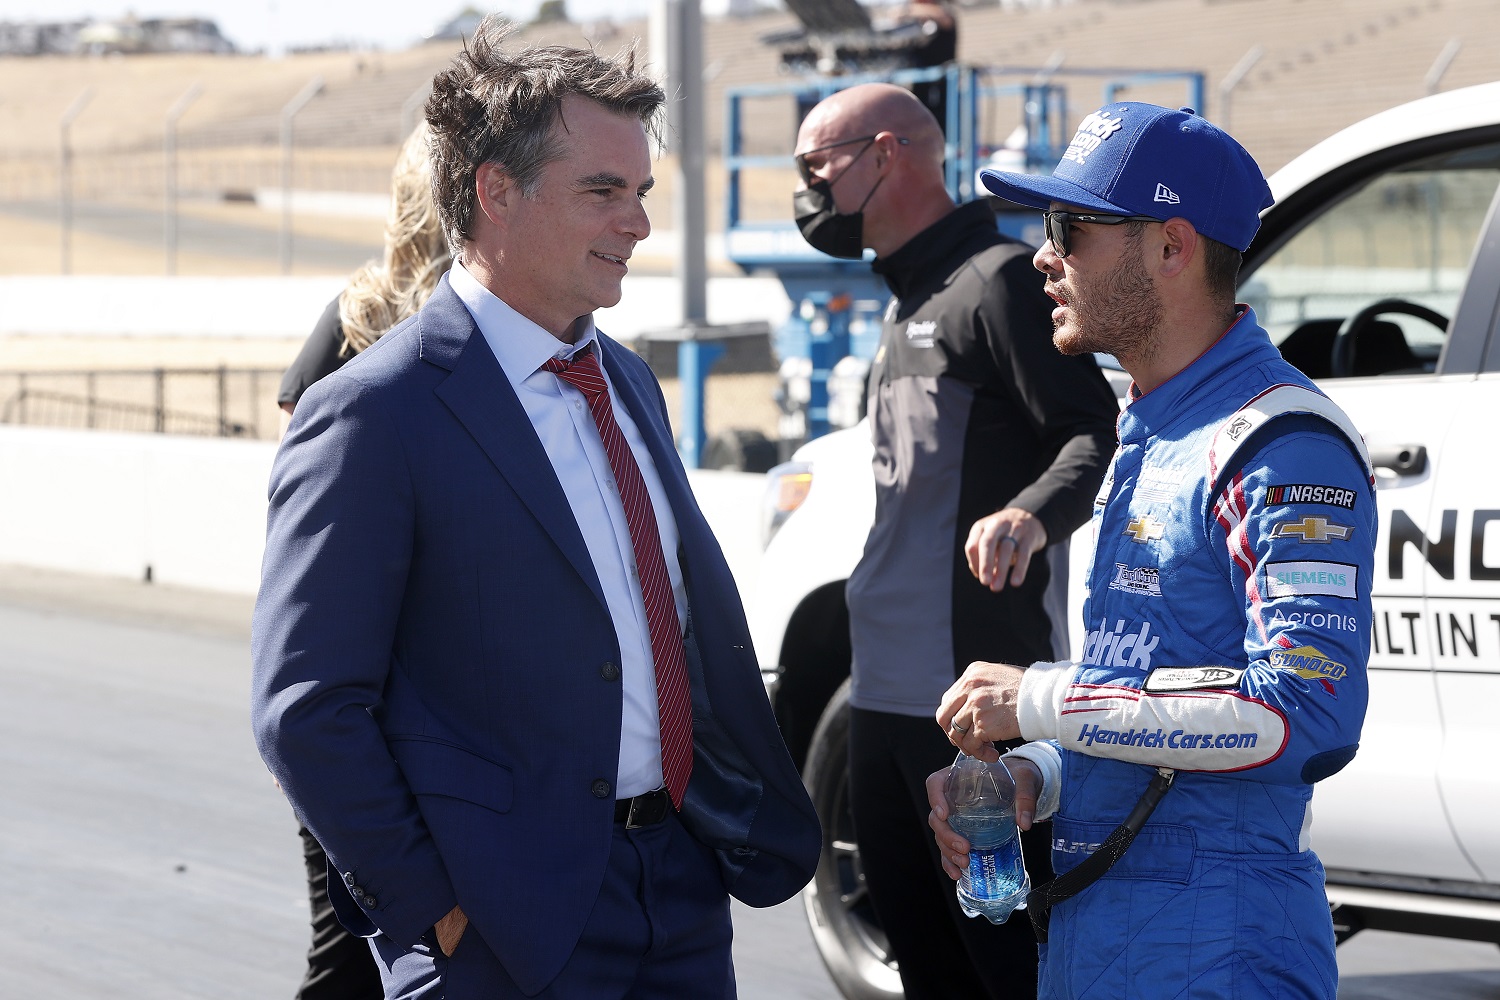 Kyle Larson, driver of the Hendrick Motorsports No. 5 Chevrolet, talks with Hall of Fame driver and TV commentator Jeff Gordon after winning the NASCAR Cup Series Toyota/Save Mart 350 at Sonoma Raceway on June 6, 2021.